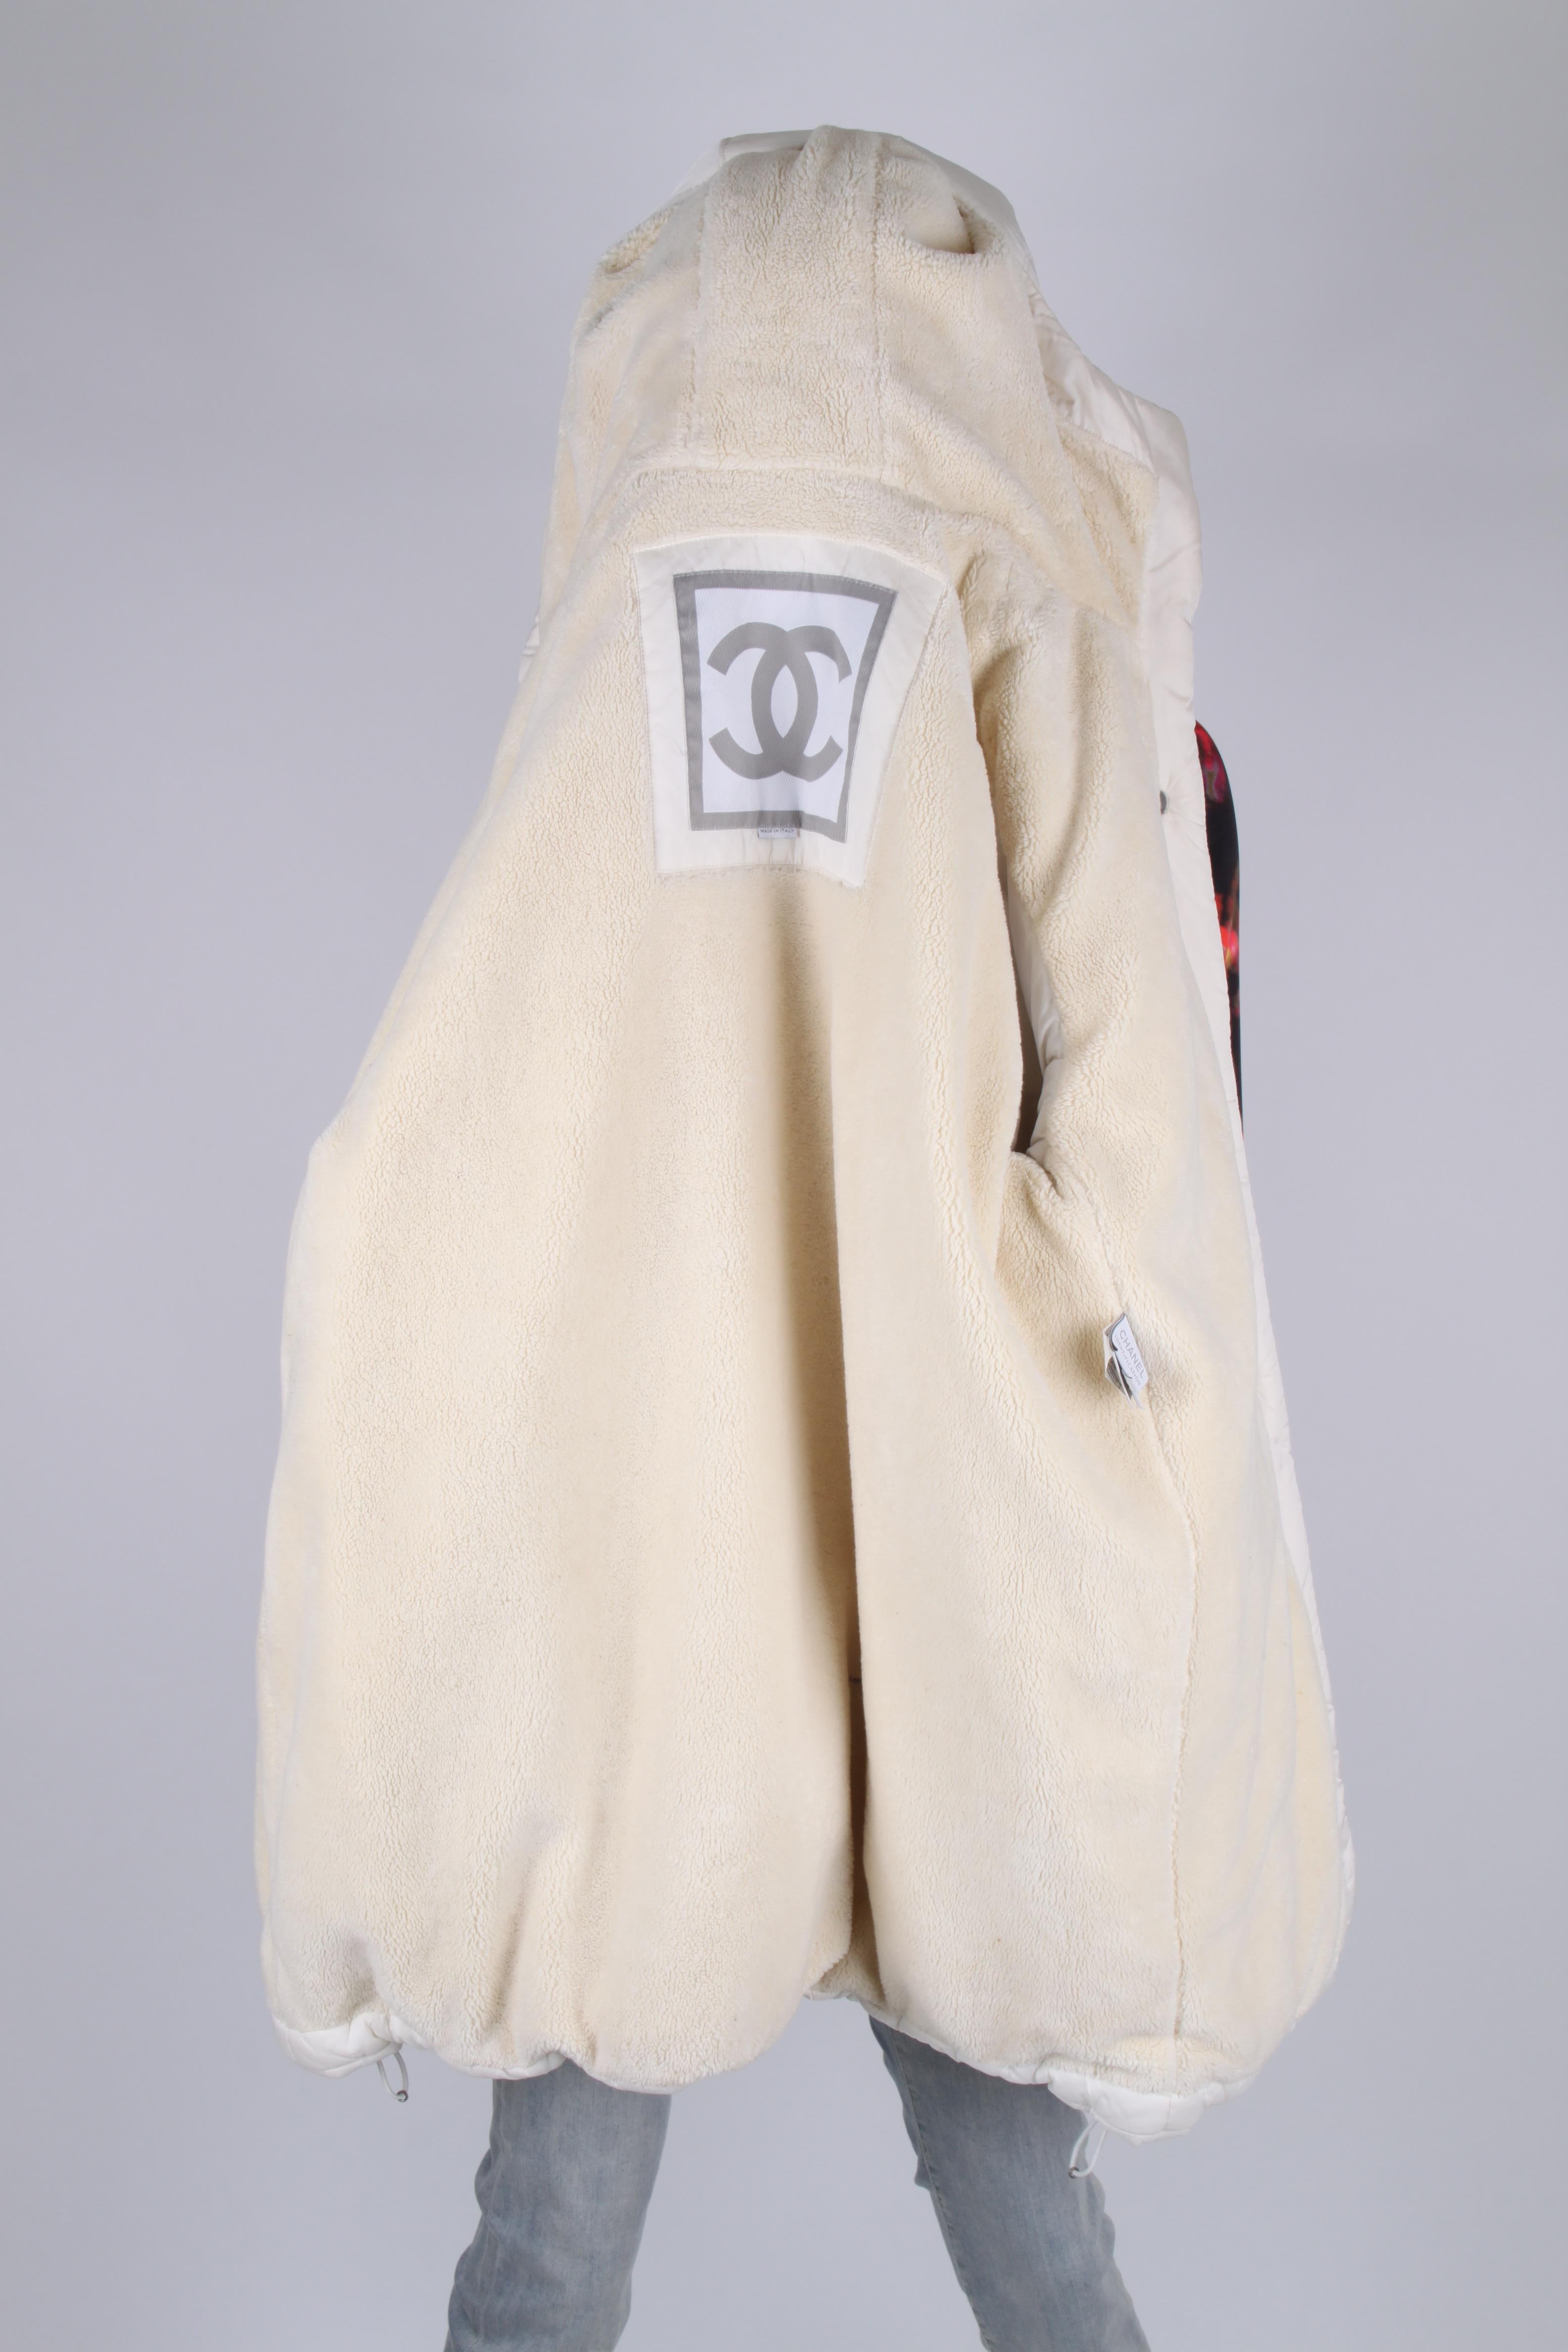 Chanel Oversized Coat - white autumn collection 2000 For Sale 2